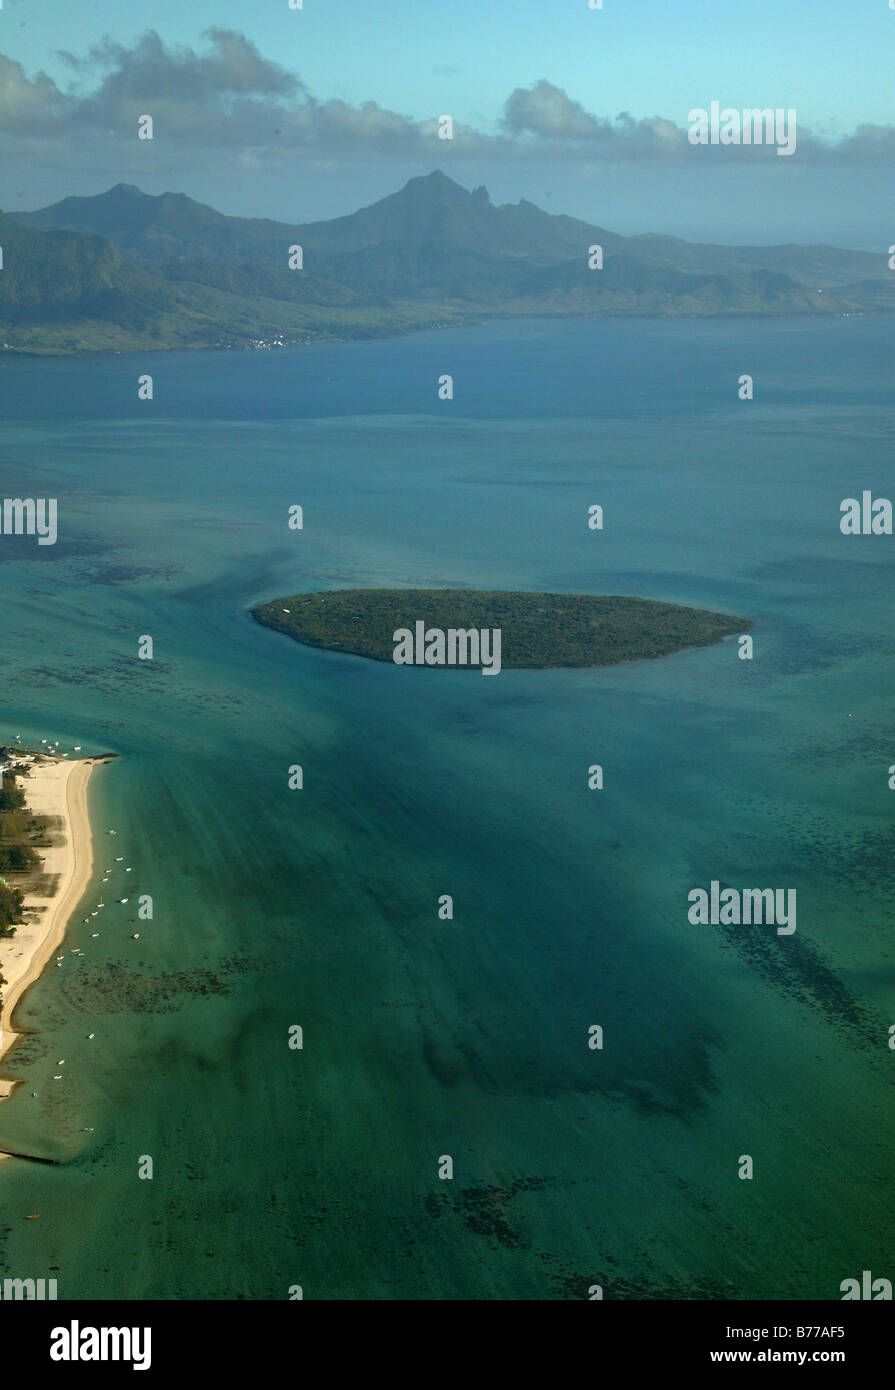 Aerial view, beach, turquoise water, coral island, mountains, Tamarin Bay, Mauritius, Indian Ocean Stock Photo